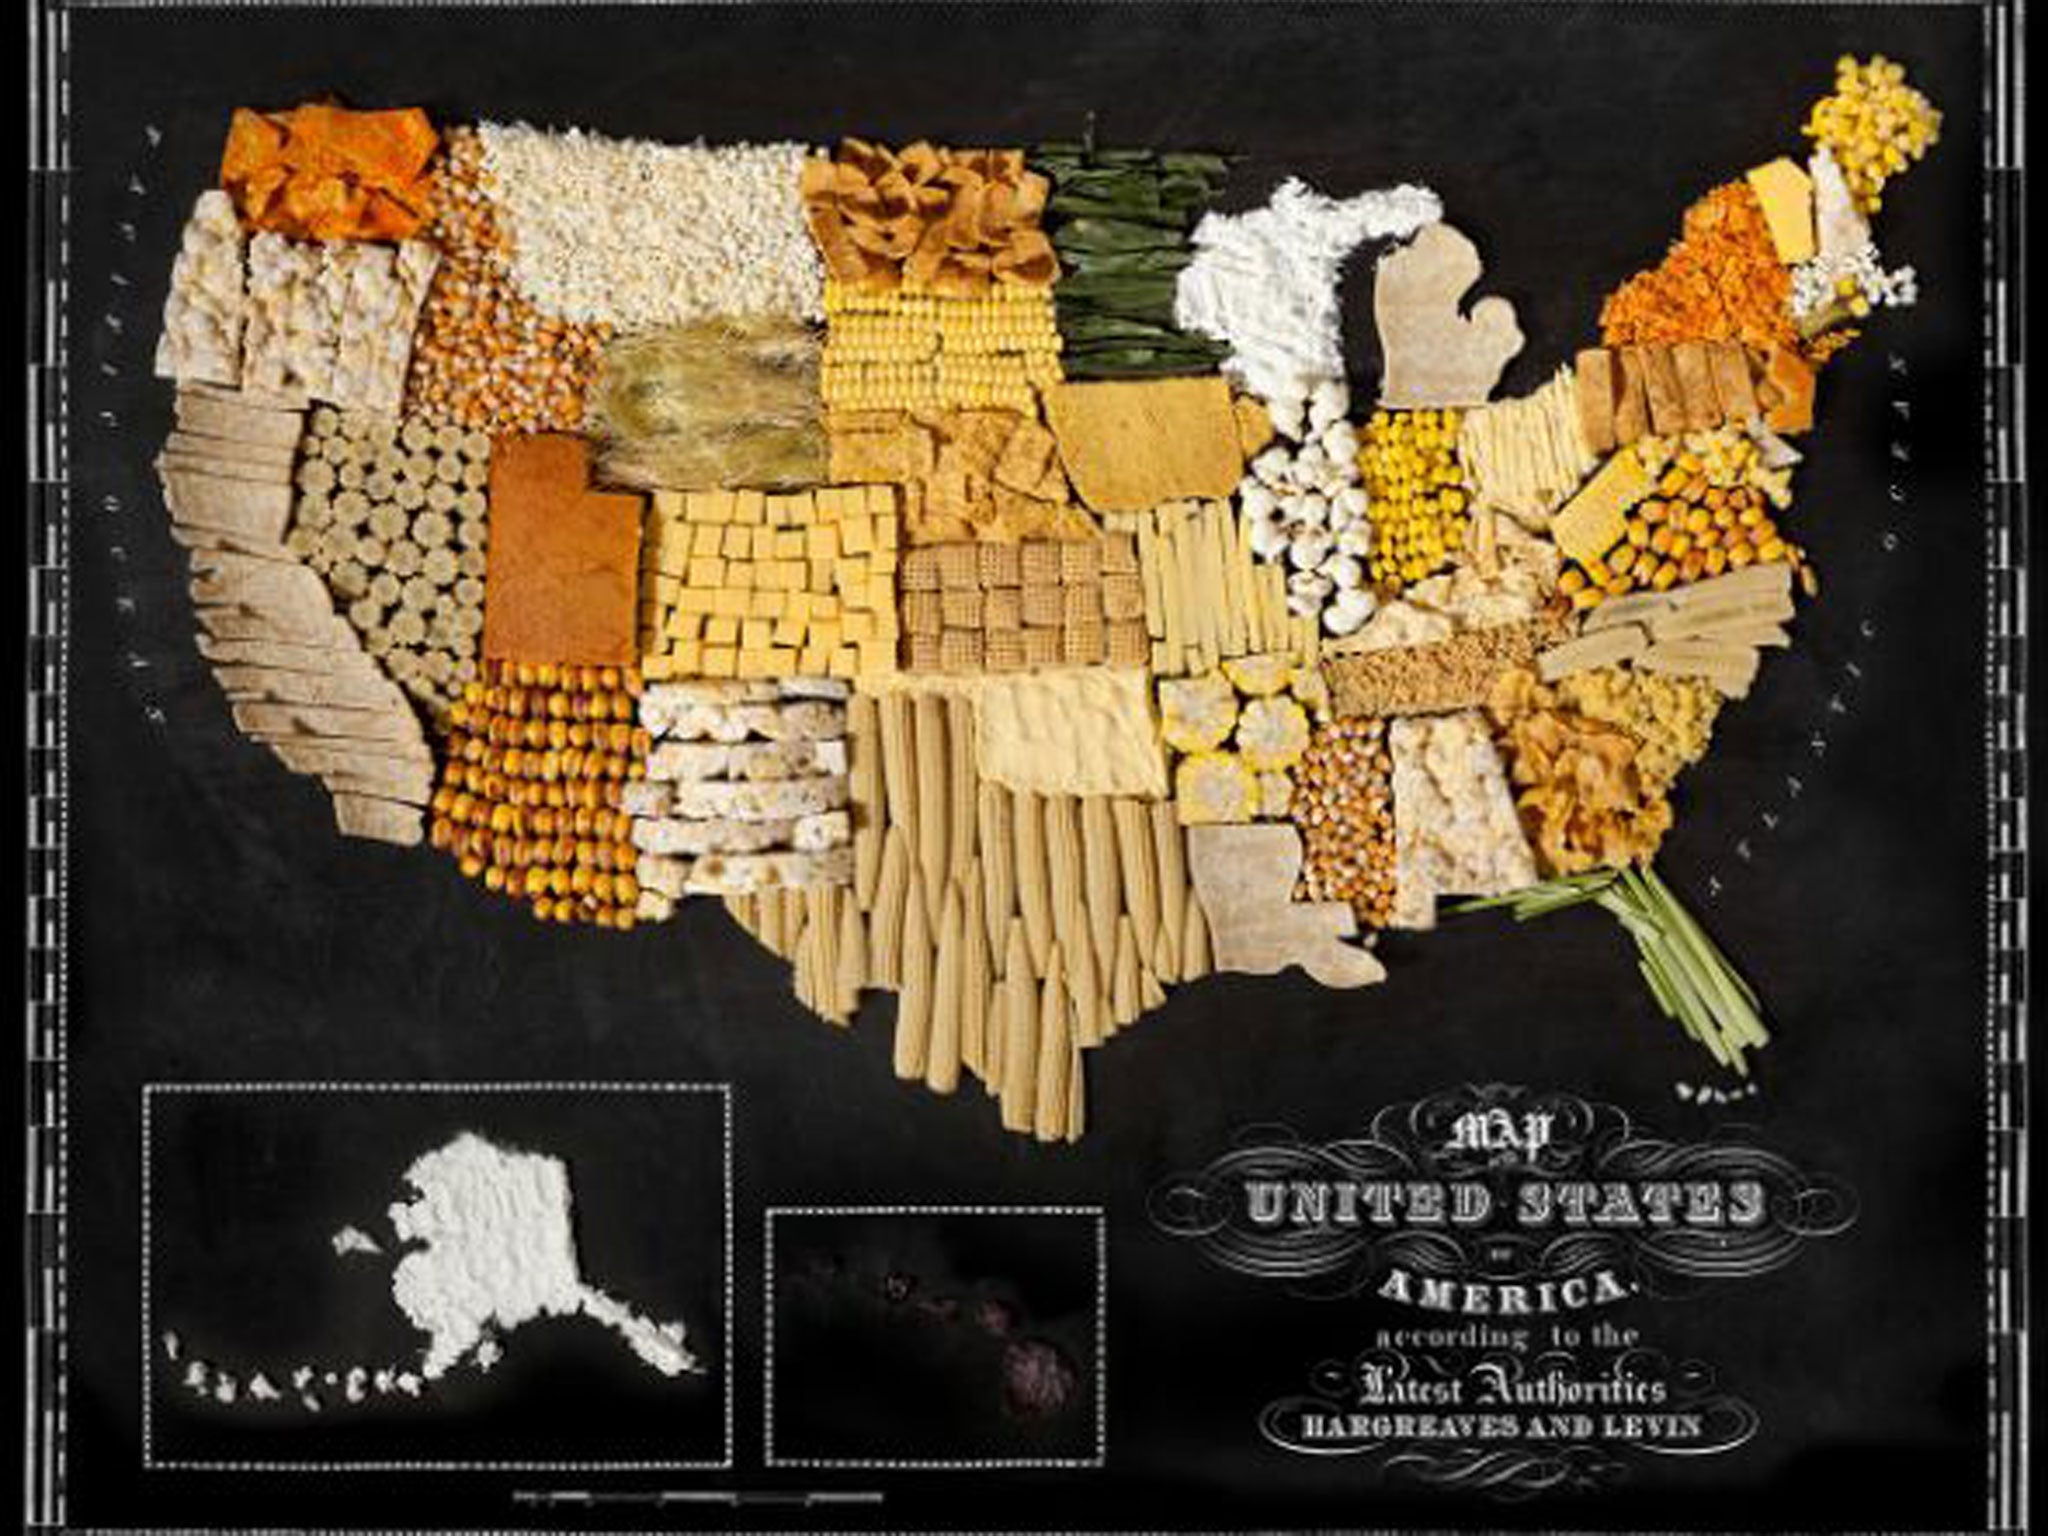 The fifty states of the USA are mapped out in corn